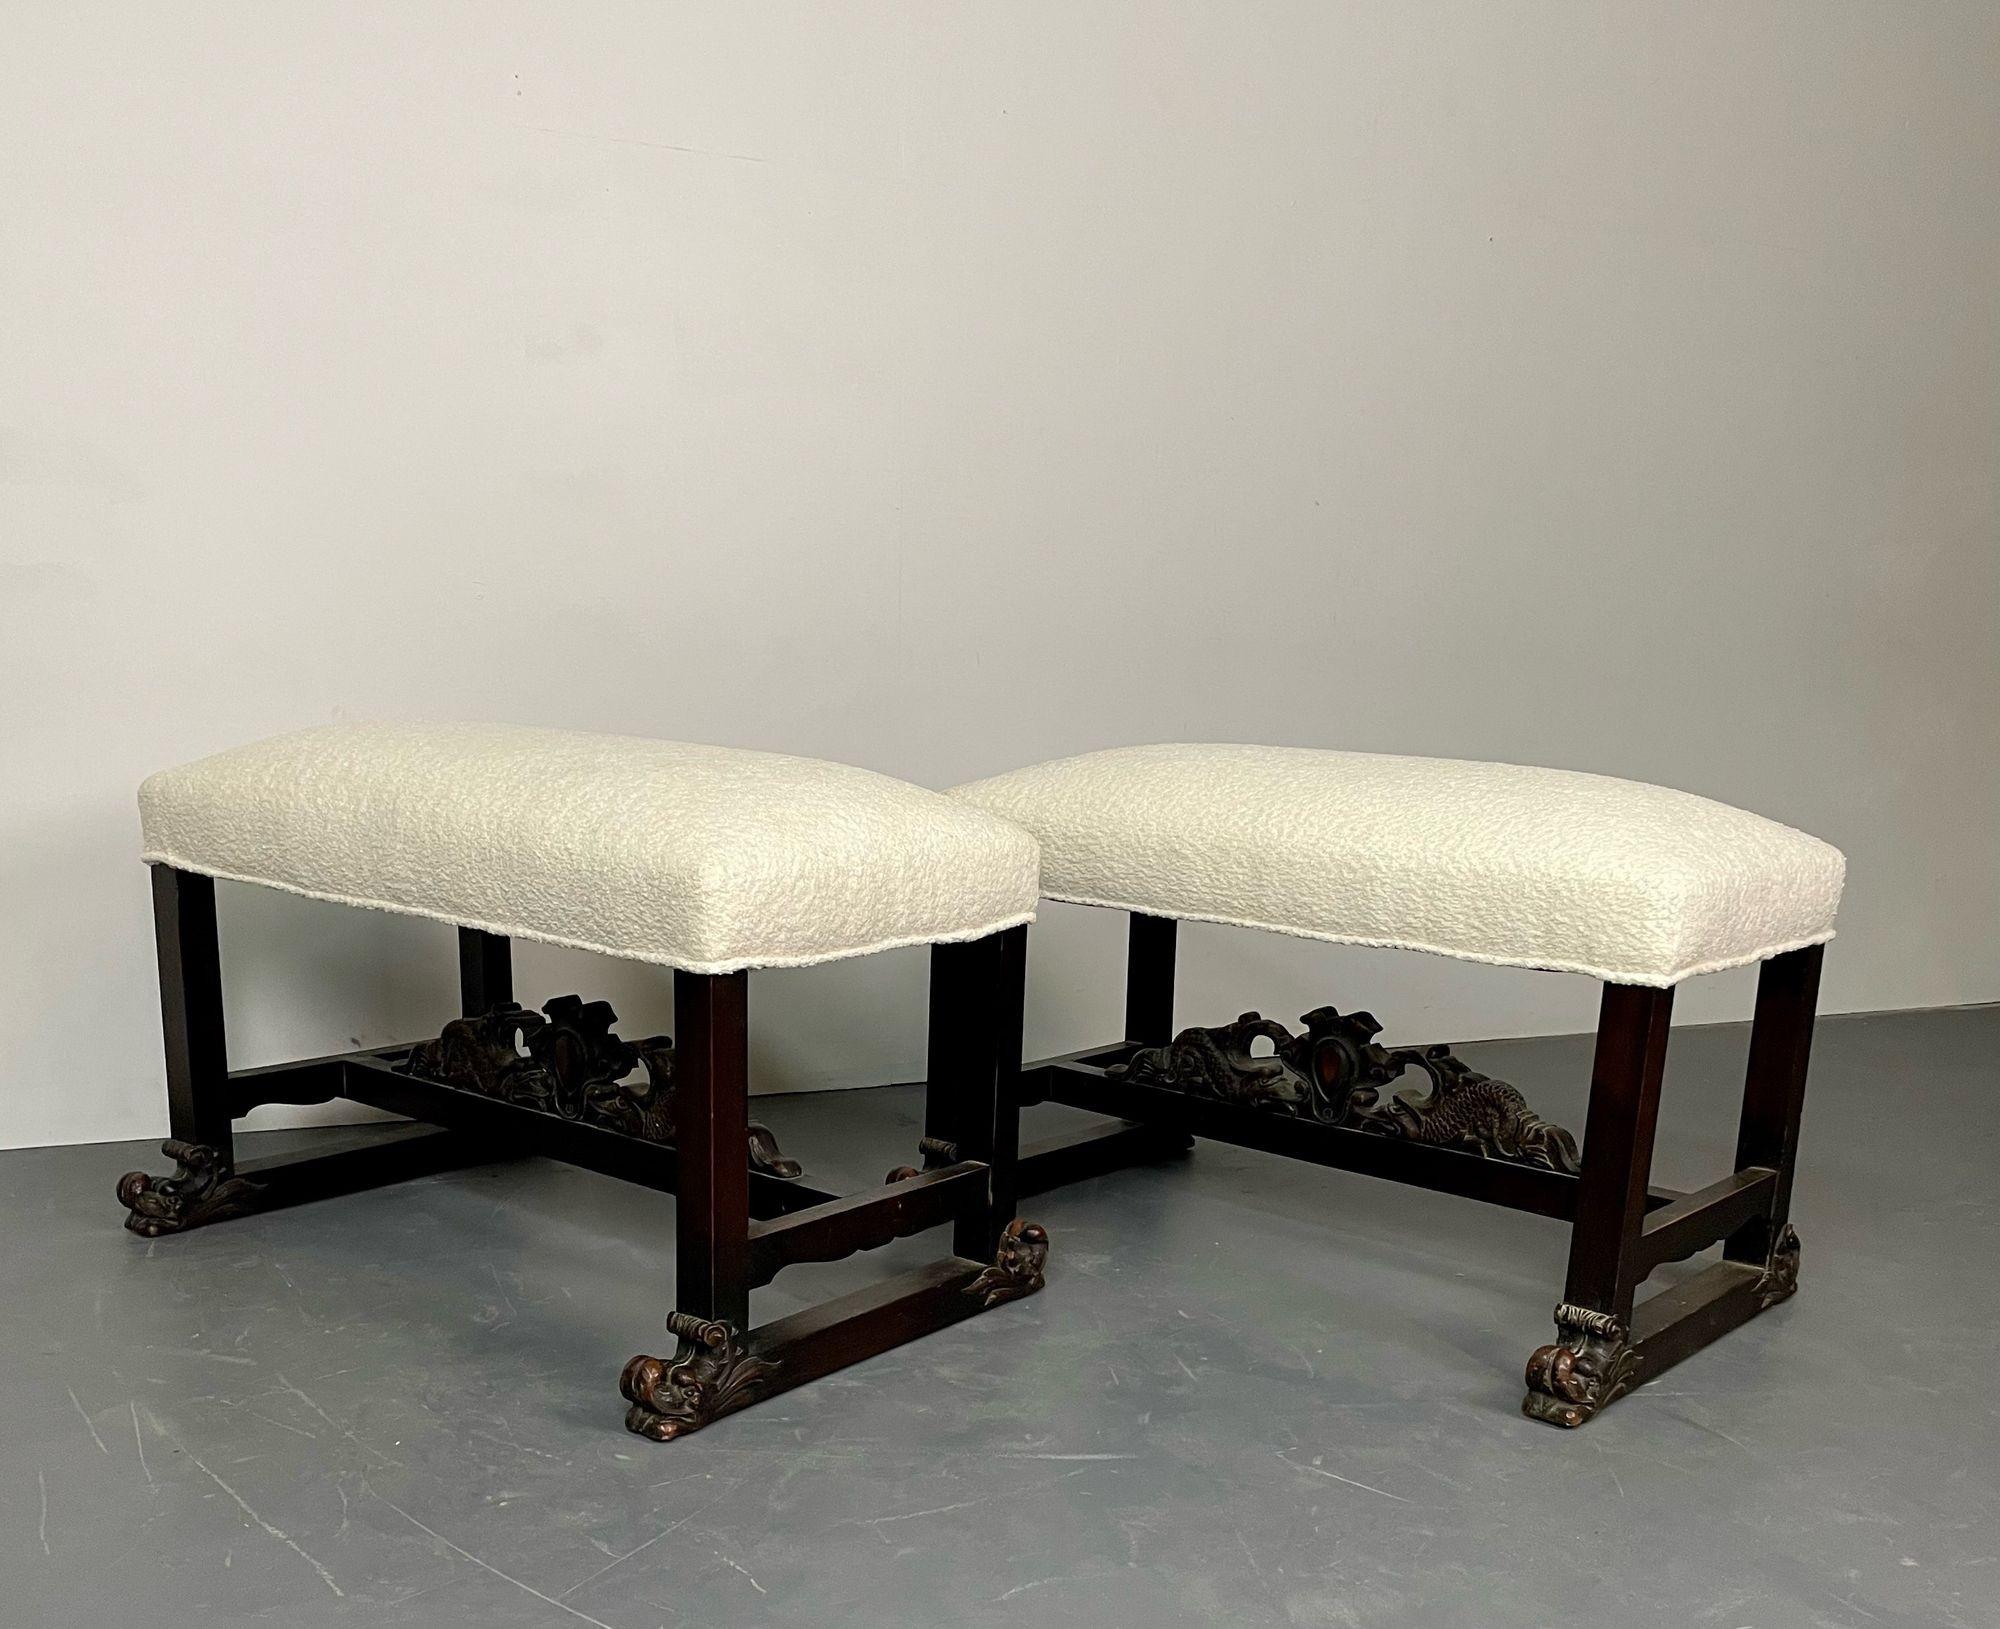 Pair of Hand Carved Georgian Style benches / footstools / ottomans, Boucle
Hand carved newly upholstered benches or footstools each having boucle cushioned tops and intricately hand carved wooden bases. All wooden parts that make up each base are